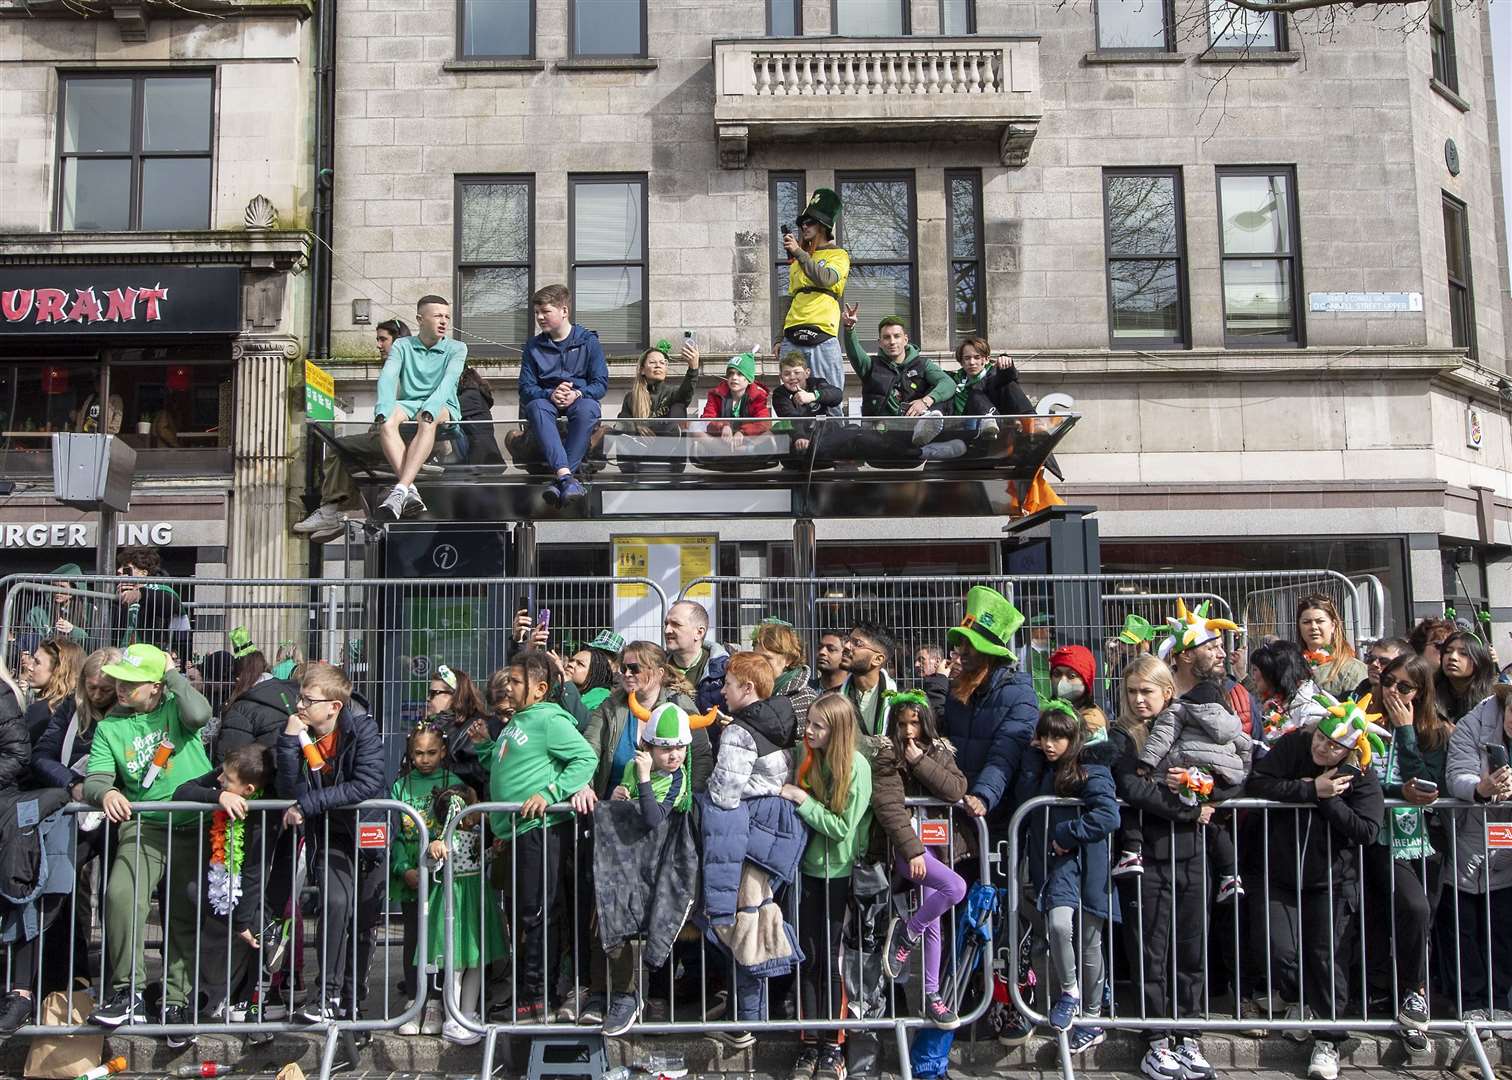 Crowds utilised various vantage points to get a good view of the celebrations (Michael Chester/PA)